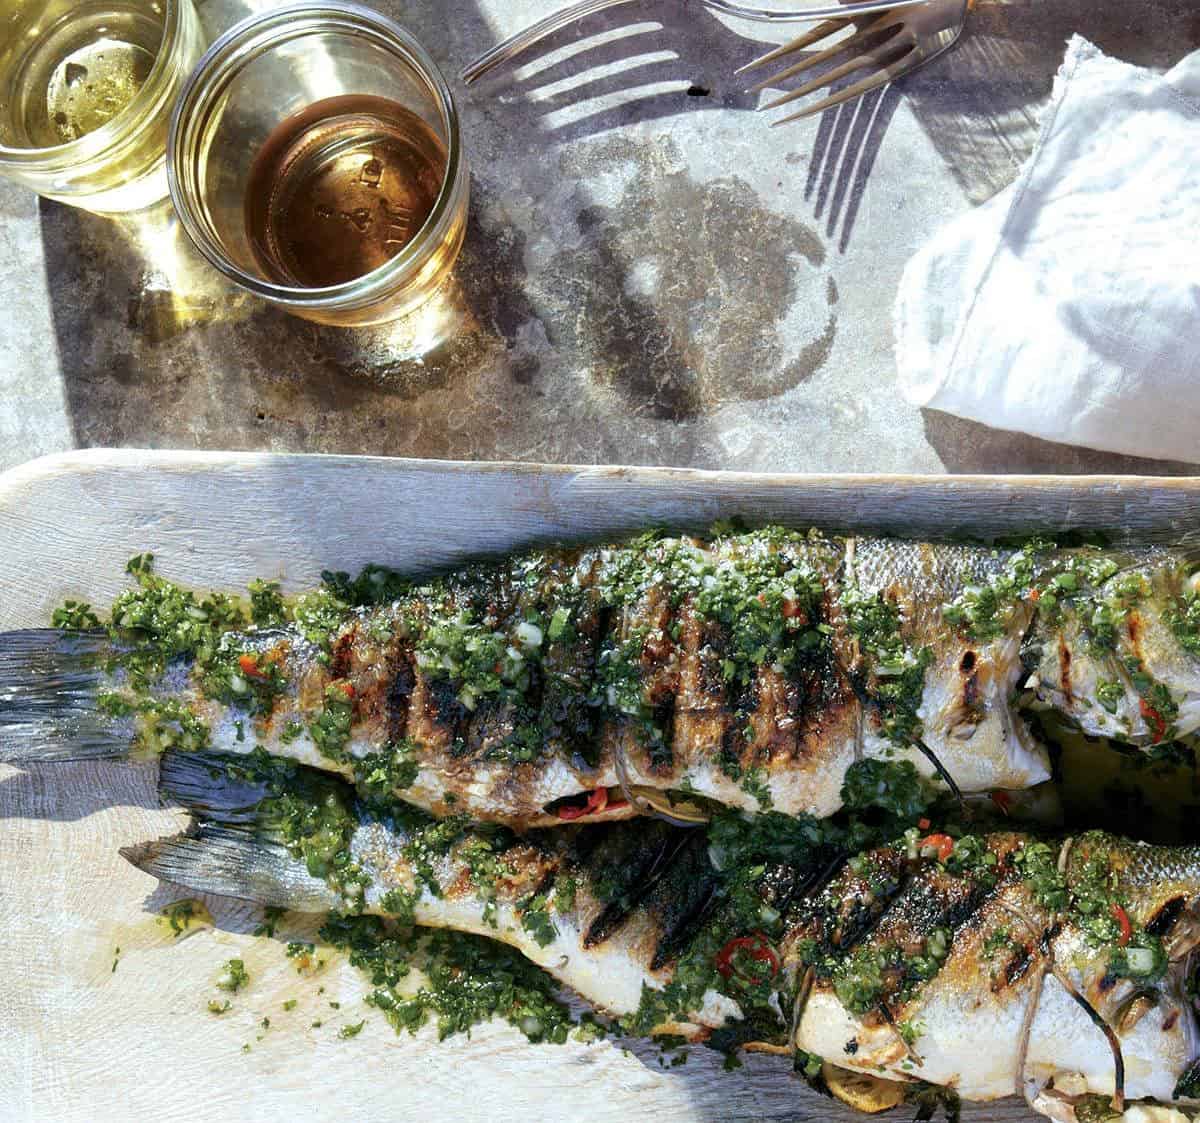  Don't be intimidated by the process of grilling a whole fish. Follow these simple steps and become the grill master of your neighborhood.